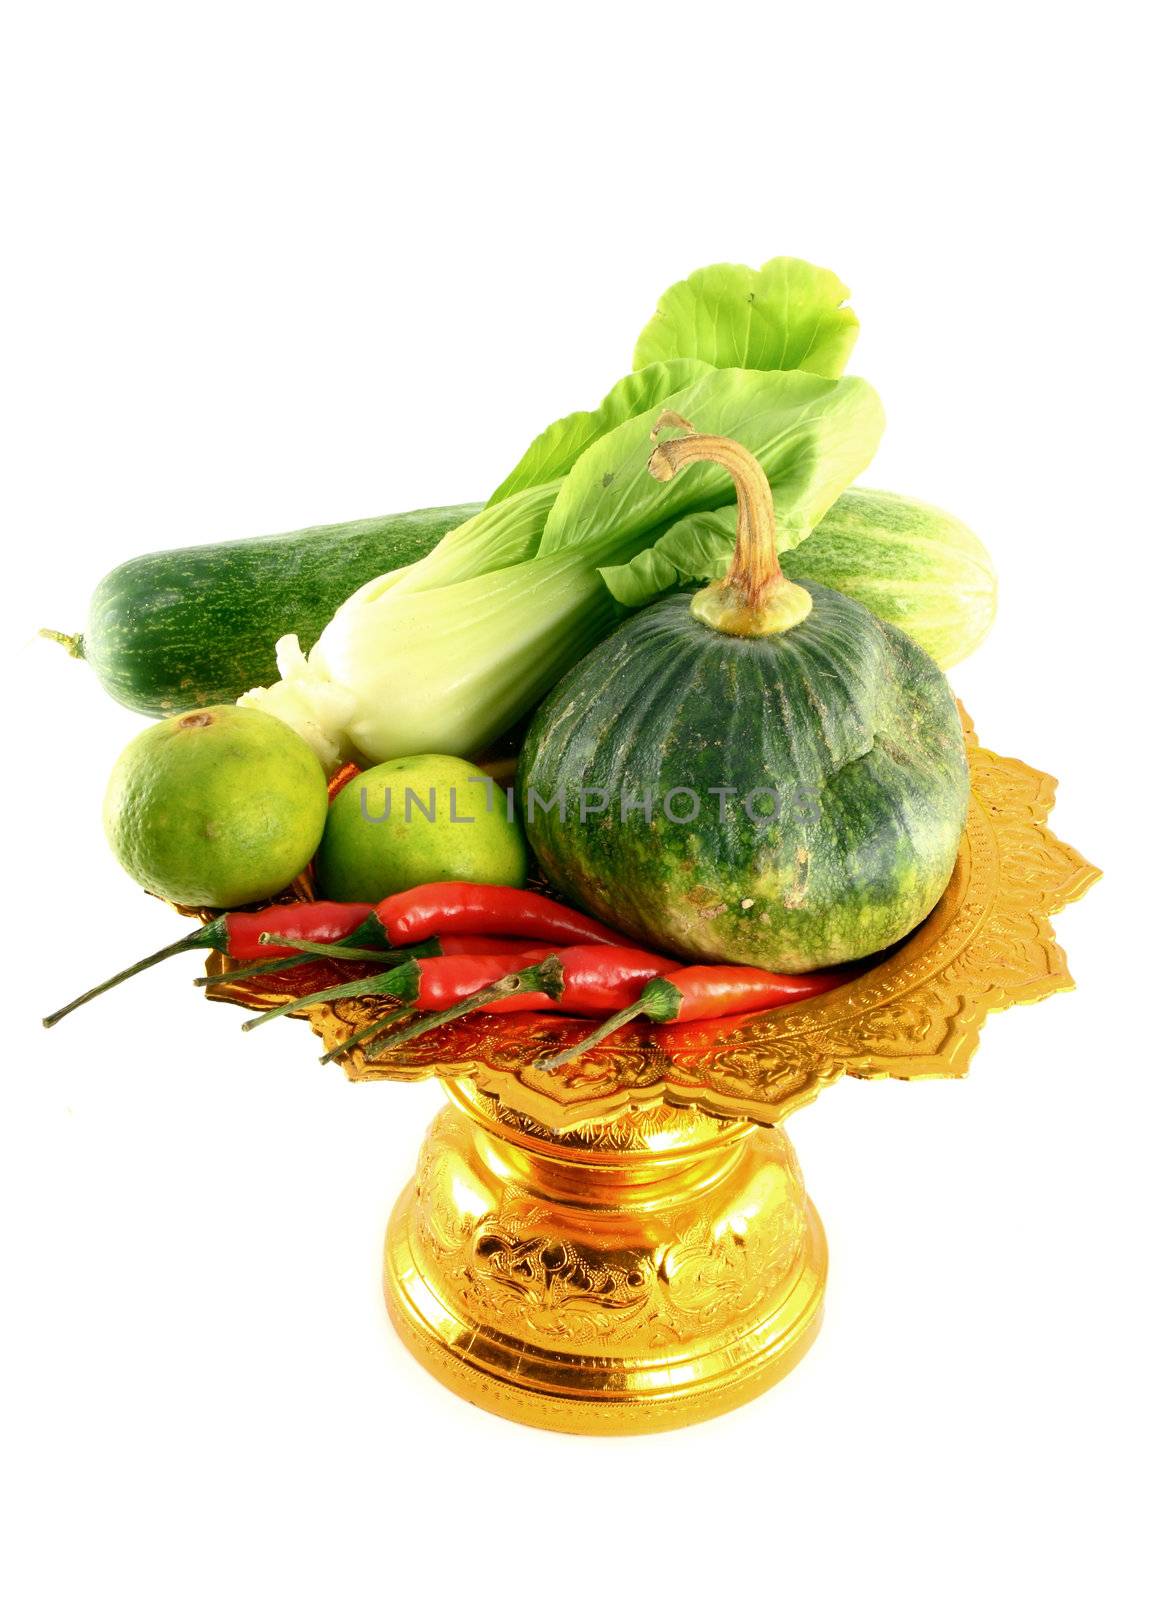 Vegetables mix on golden tray on white background